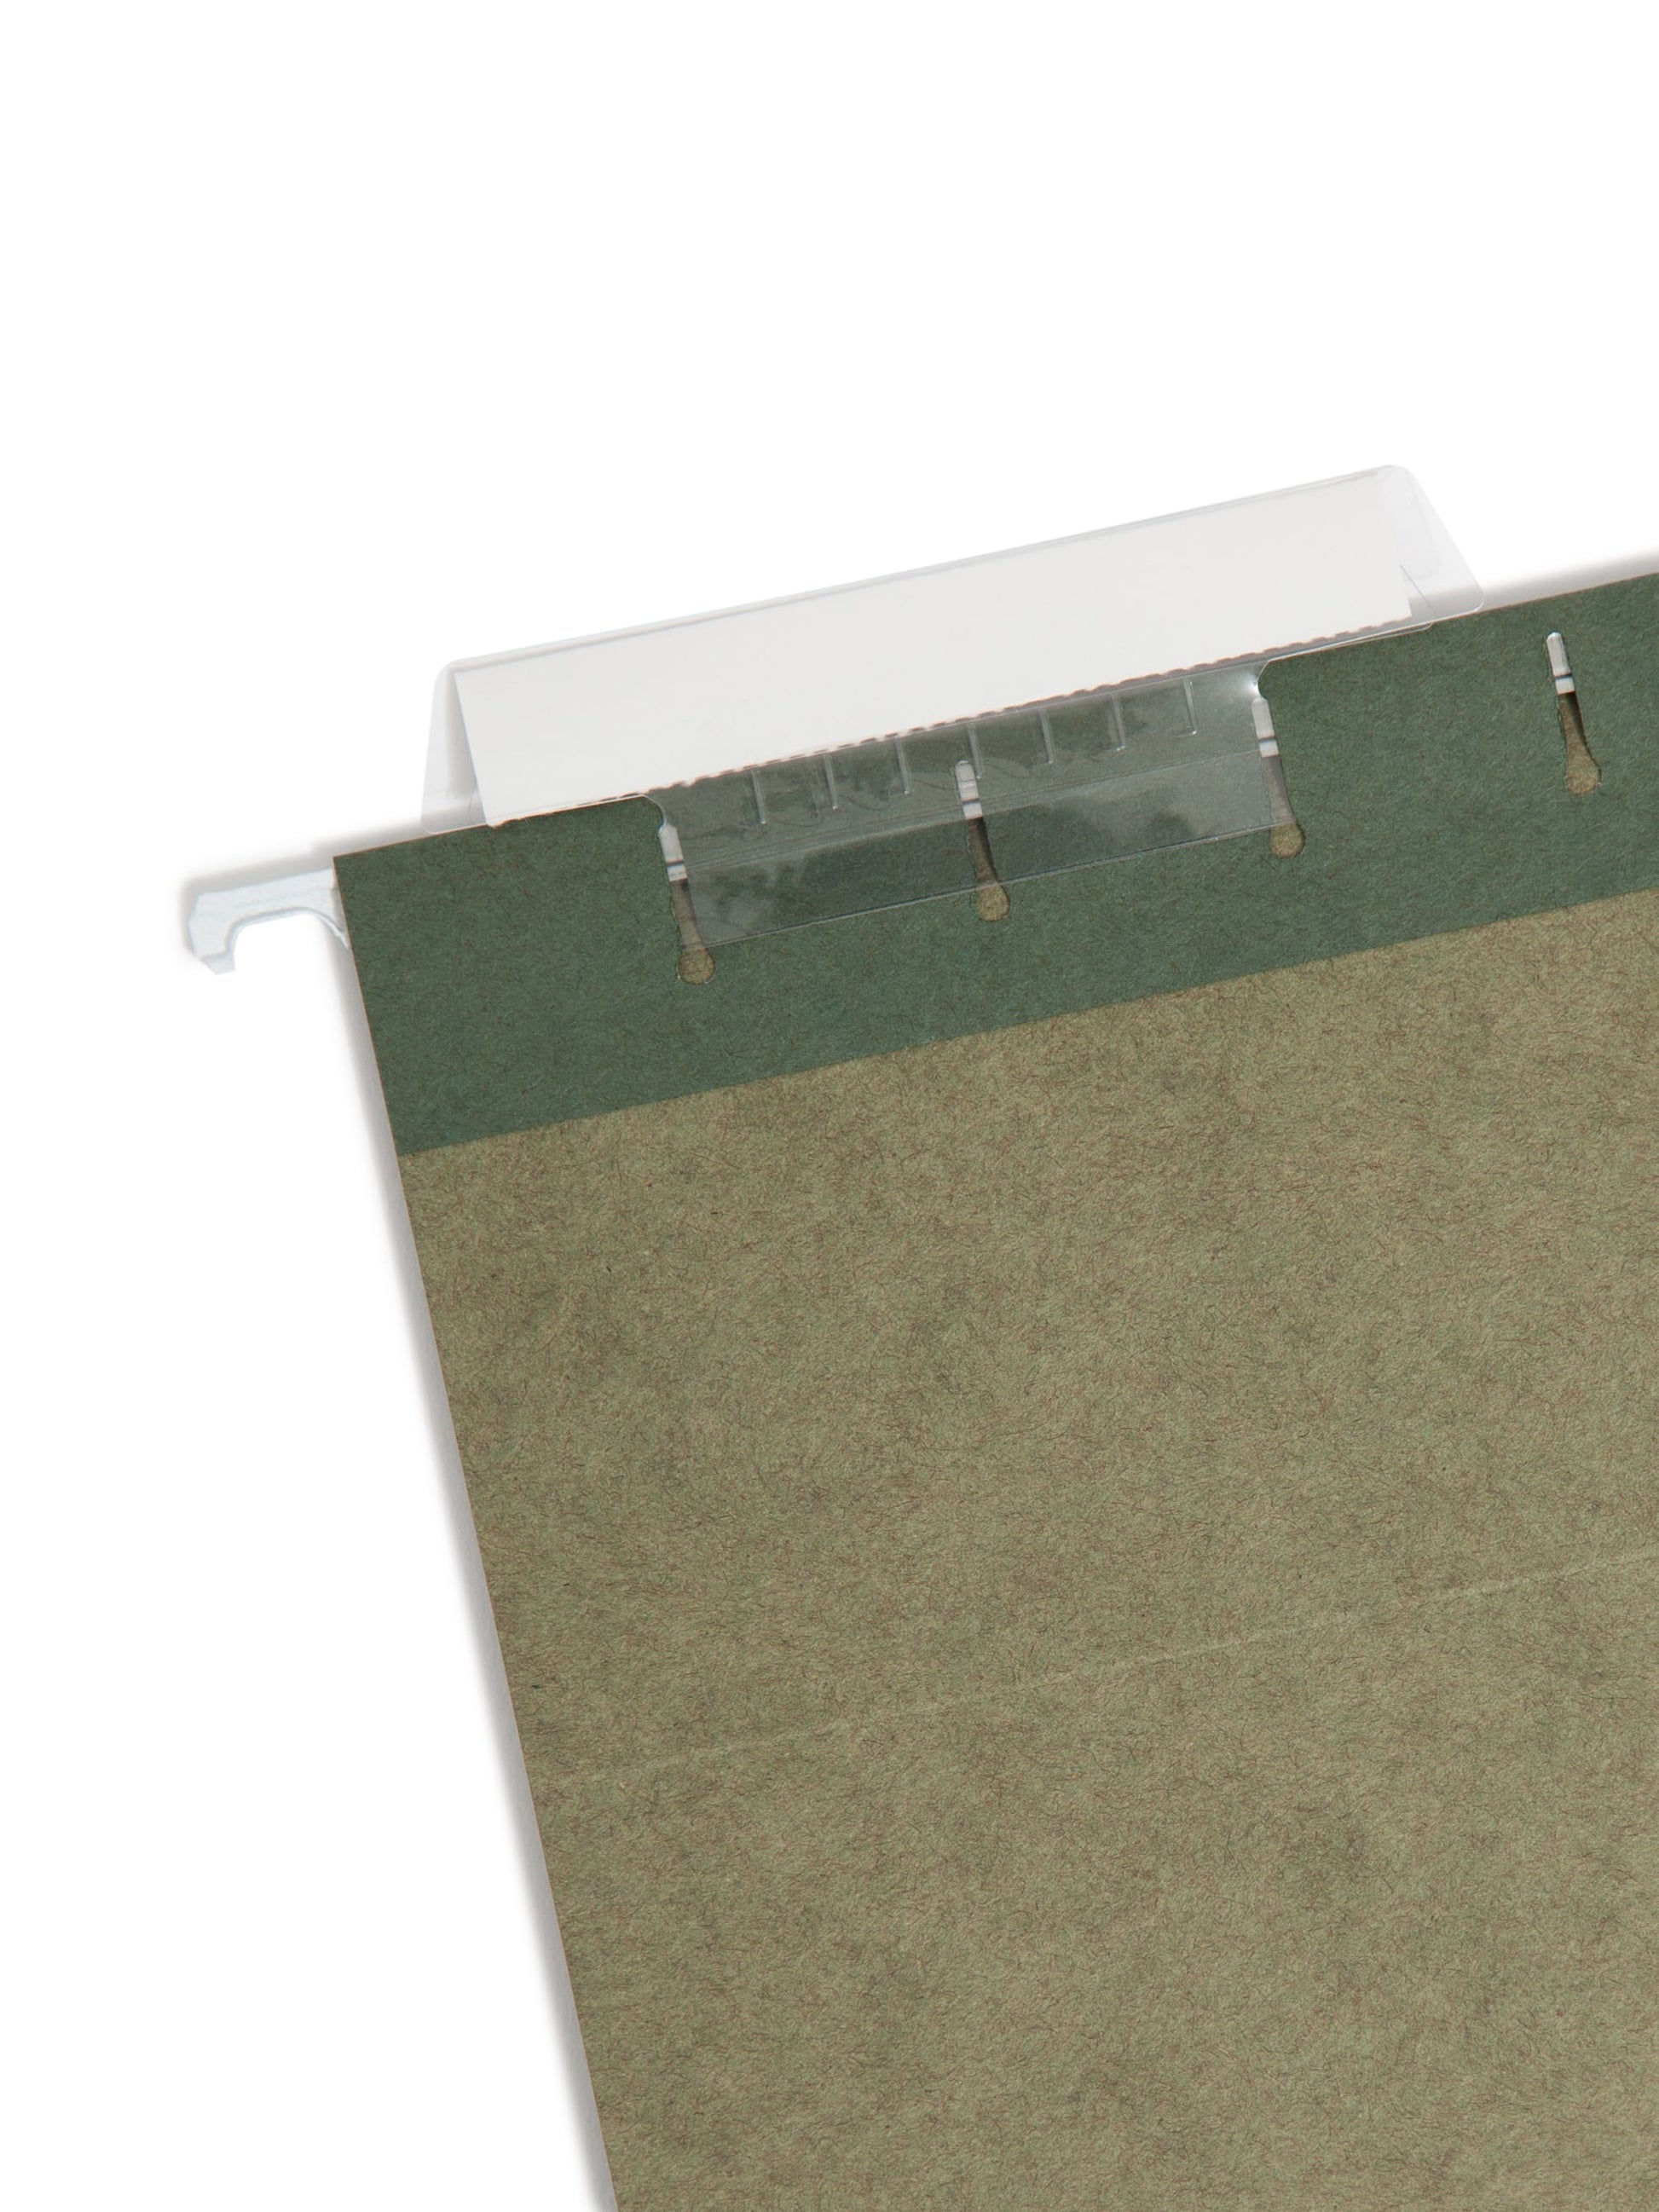 Standard Hanging File Folders with 1/3-Cut Tabs, Standard Green Color, Legal Size, Set of 25, 086486641357